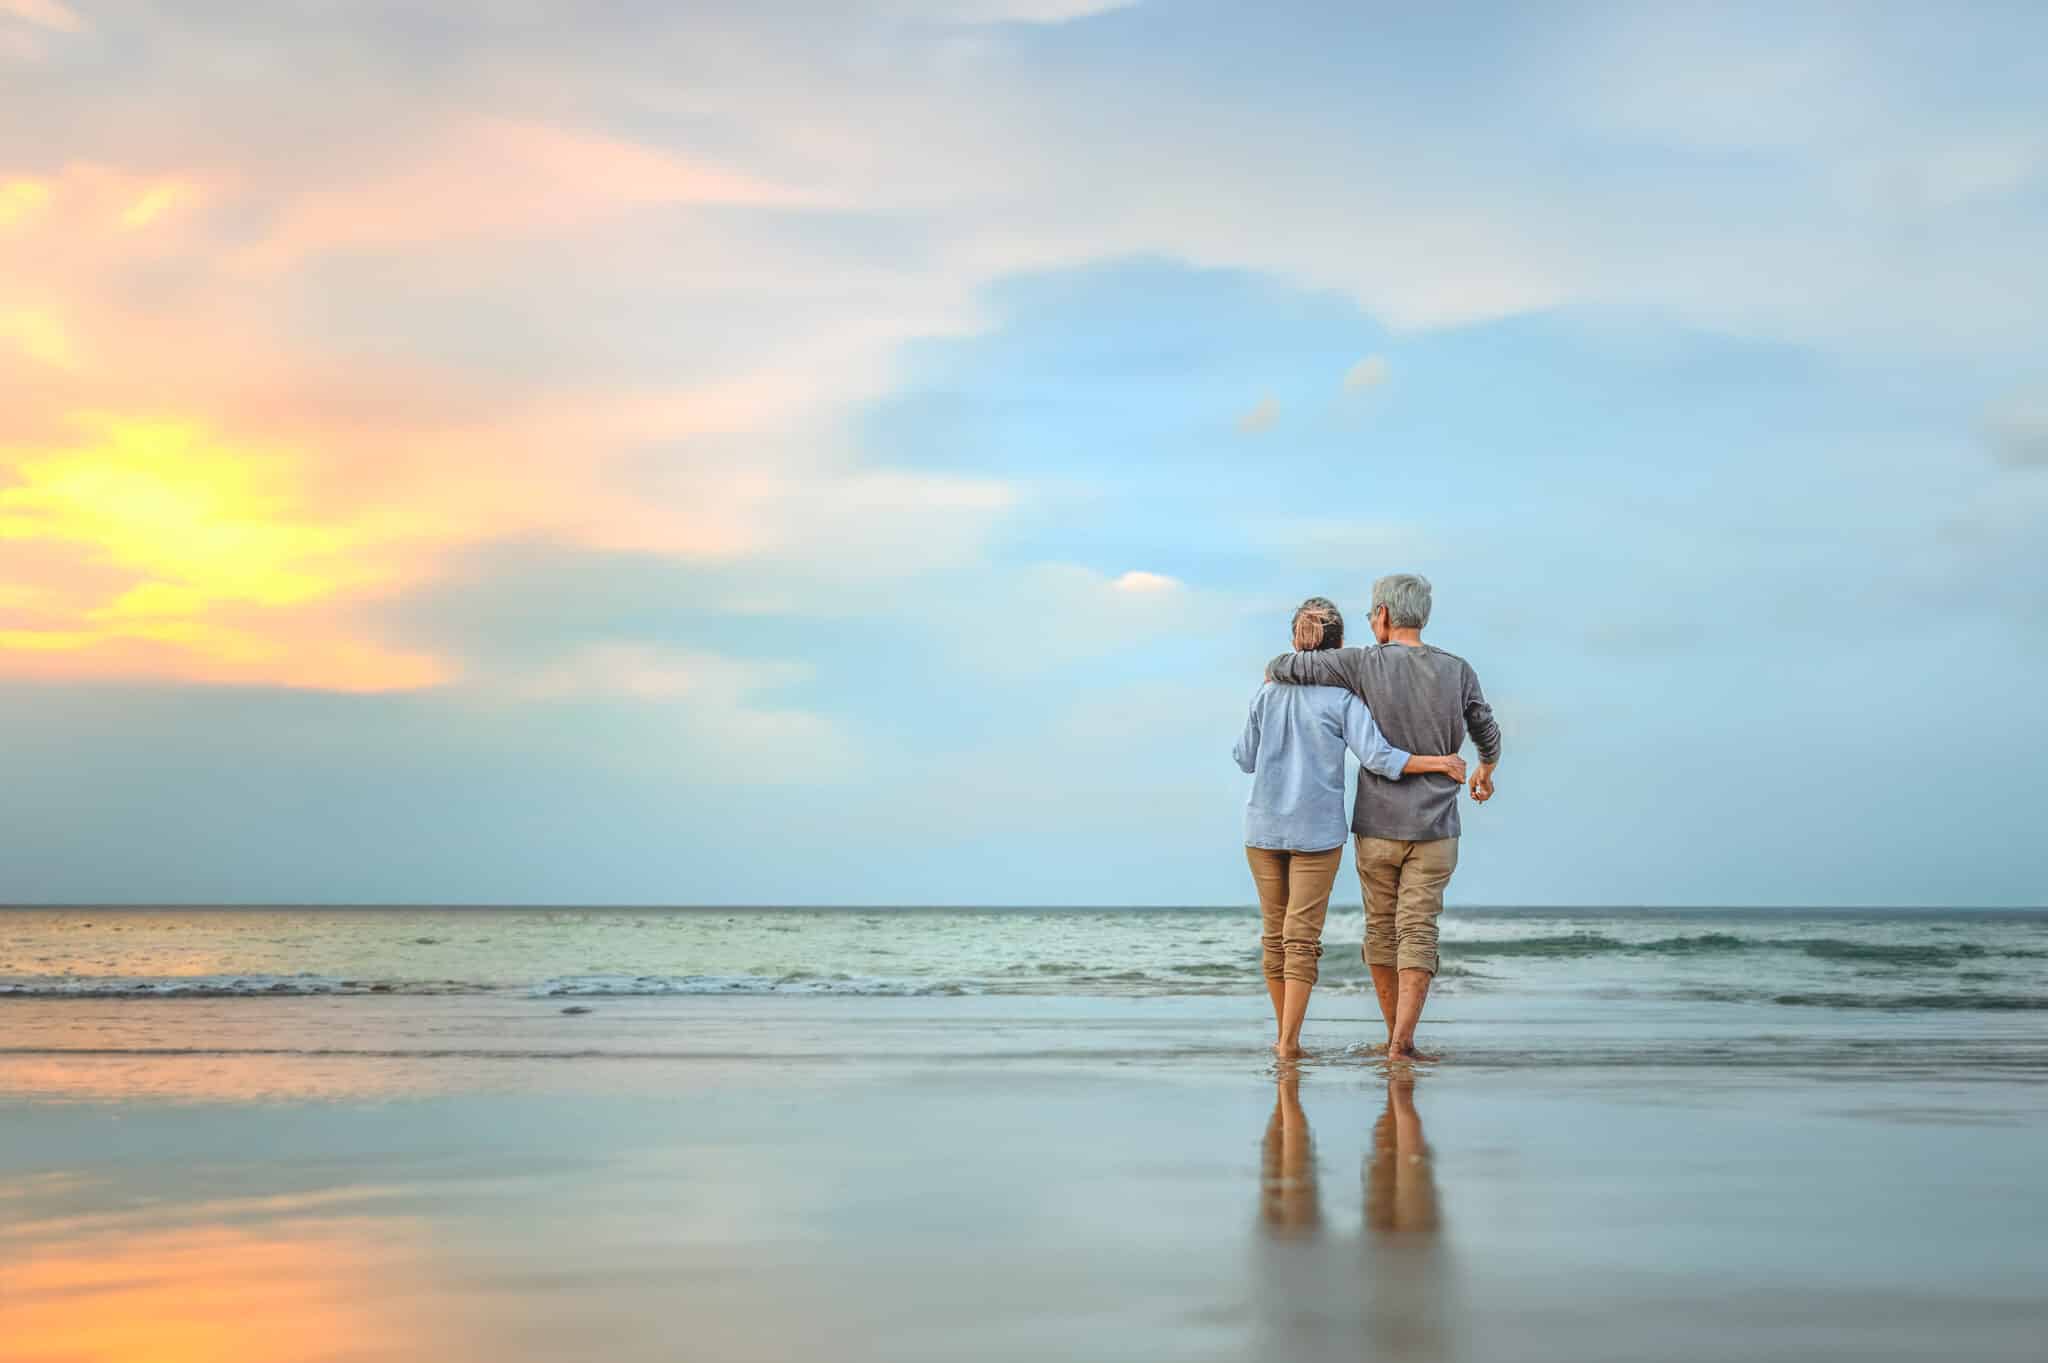 Senior couple walking on the beach holding hands at beach sunrise in evening.